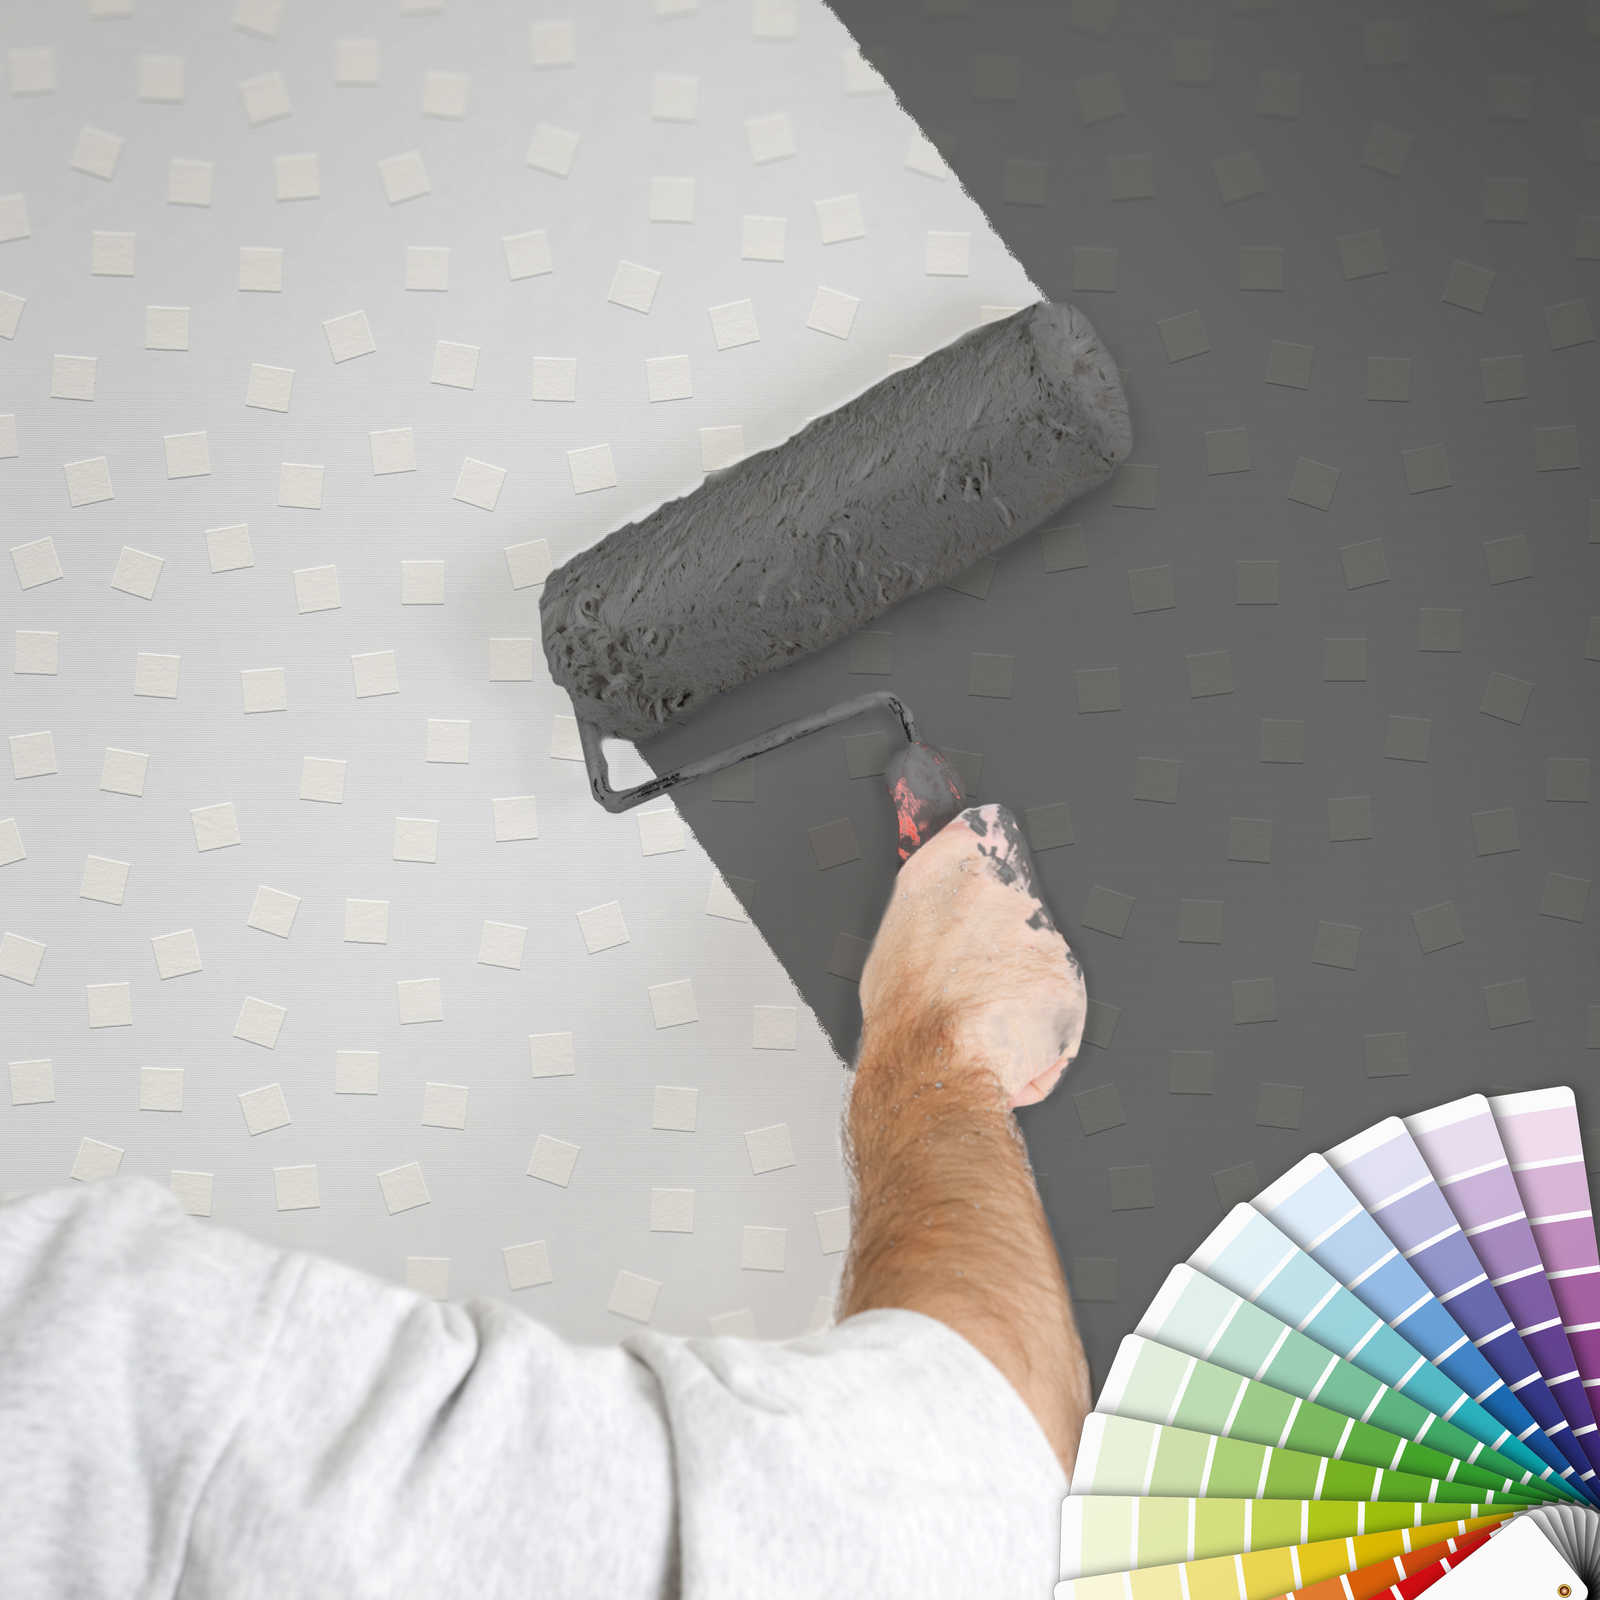             Wallpaper graphic pattern & 3D effect - Paintable, White
        